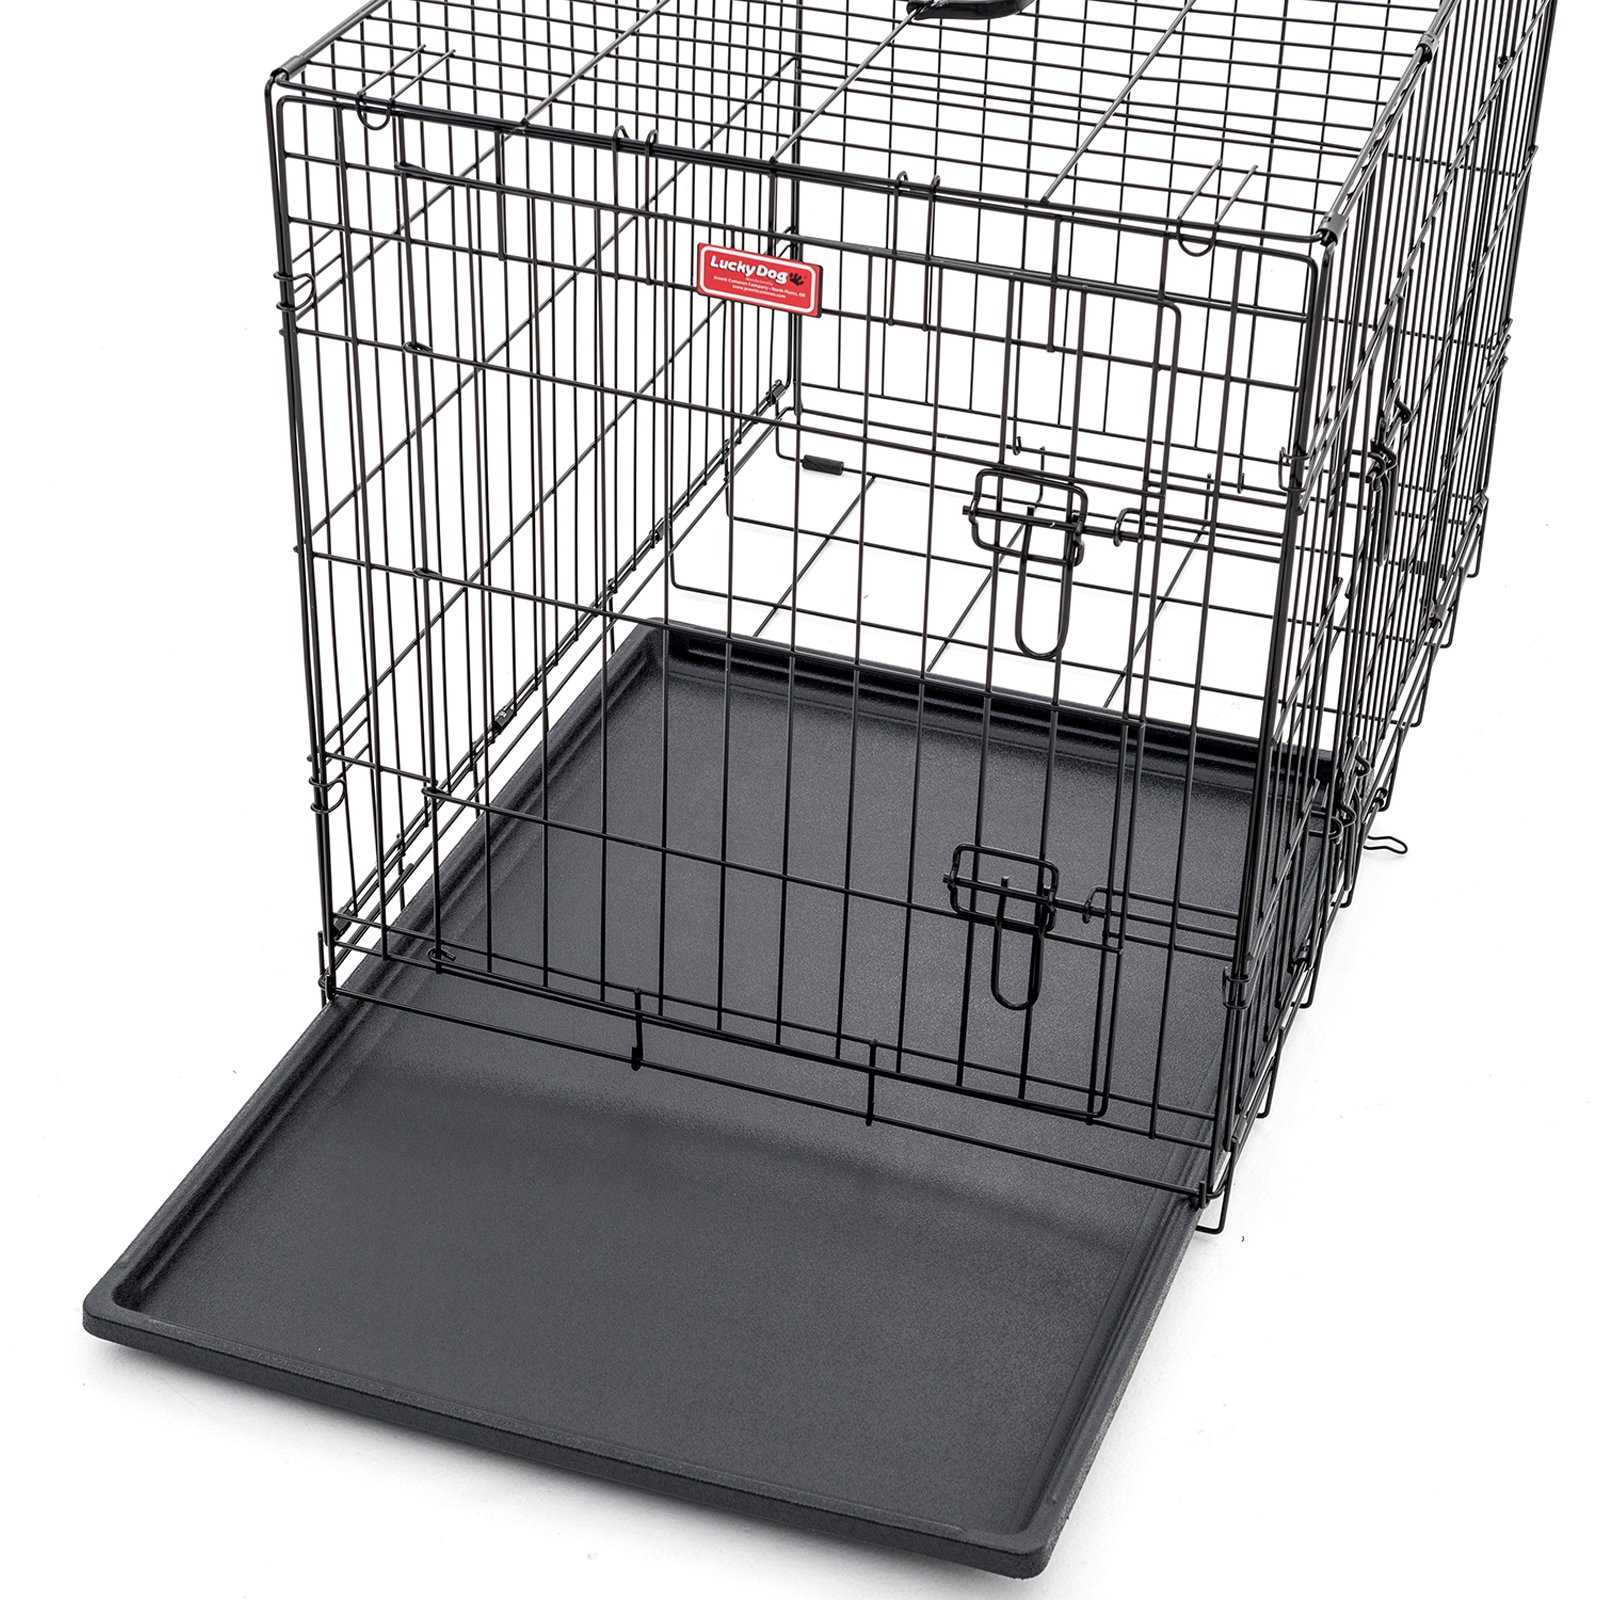 Lucky Dog Folding Black Wire 2 Door Training Crate, 36" - image 3 of 9